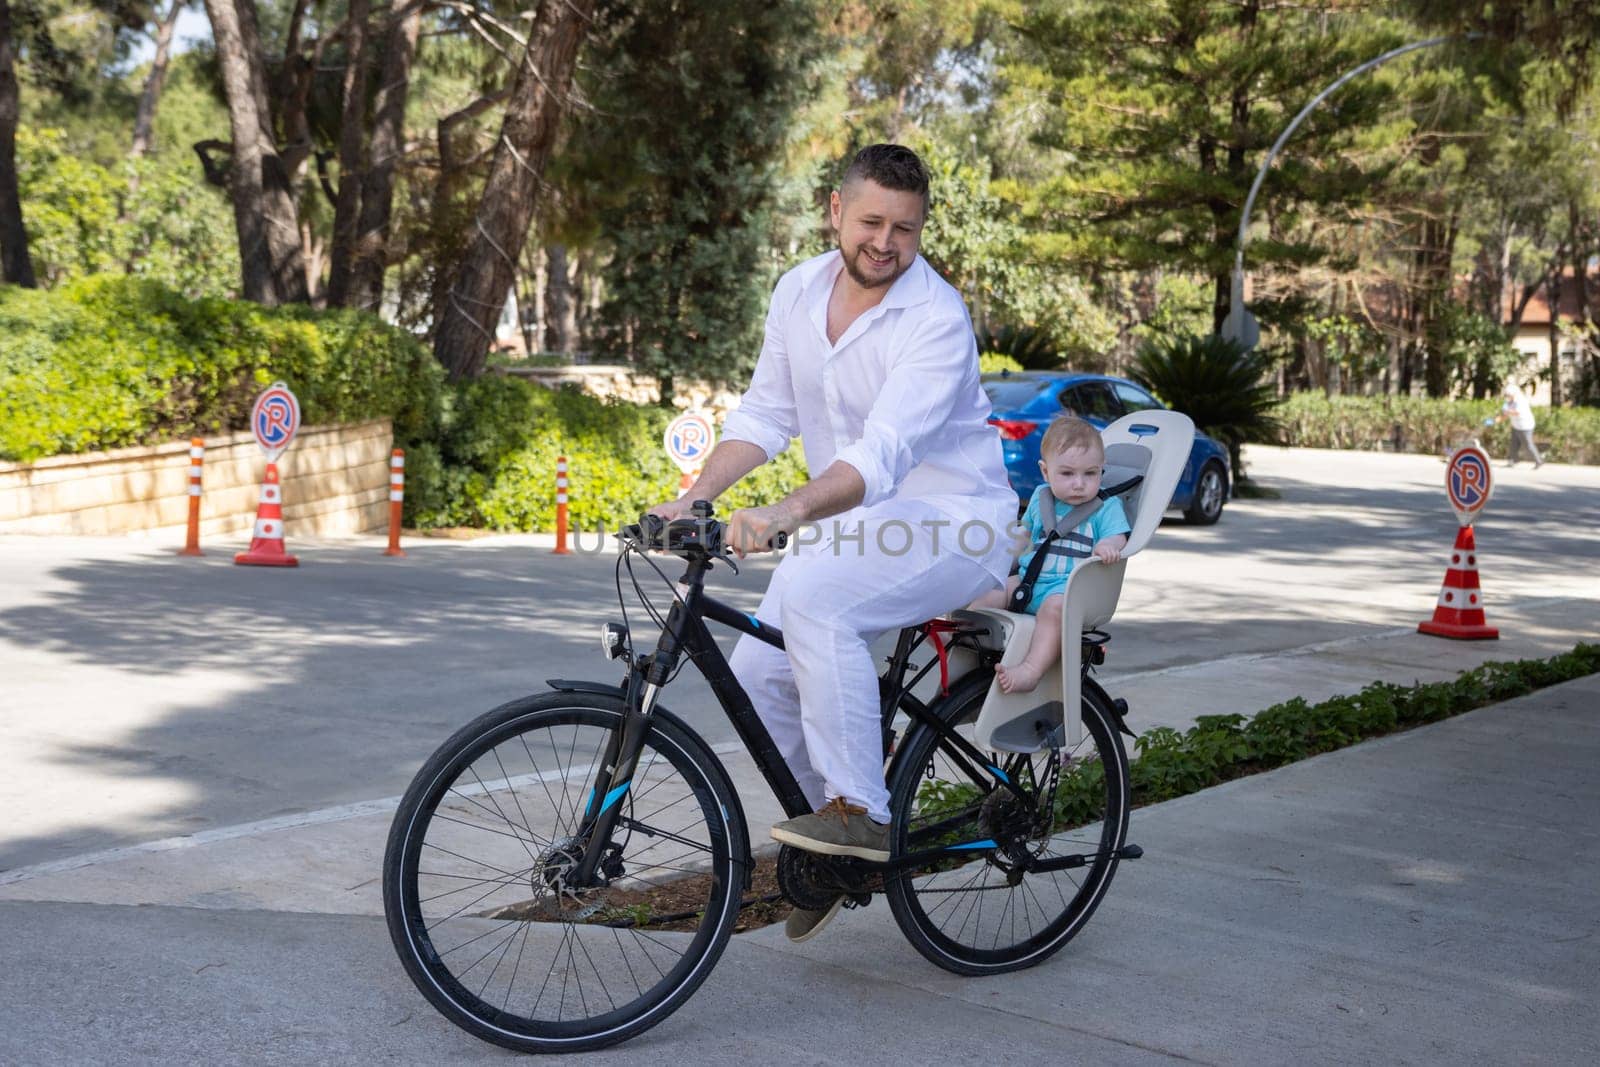 Father with his son on the back riding a bicycle. Mid shot